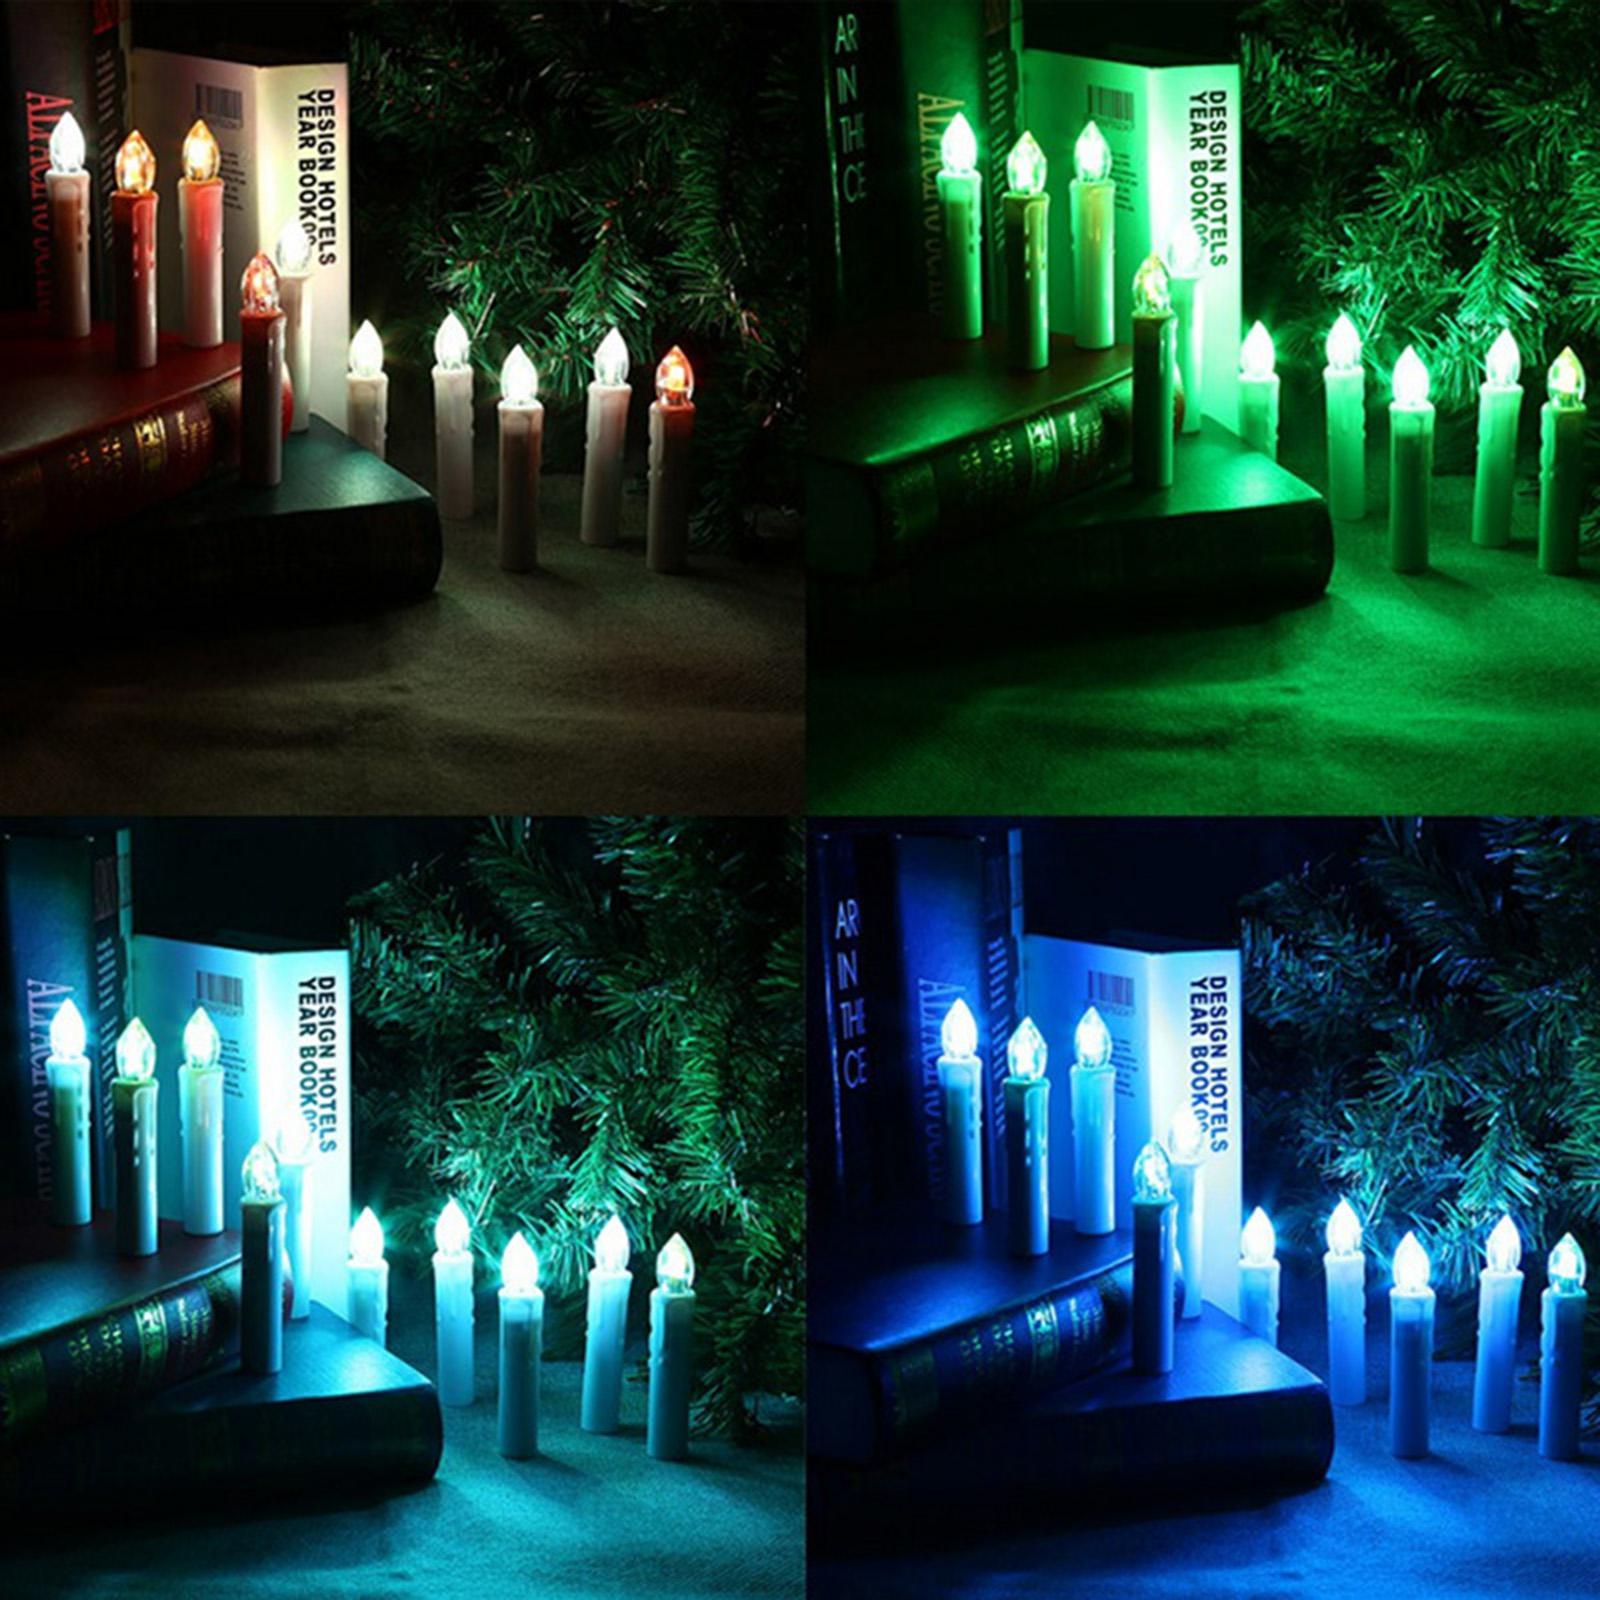 10 LED Electric Flameless Window Candle Lights Remote Control Wedding Decor